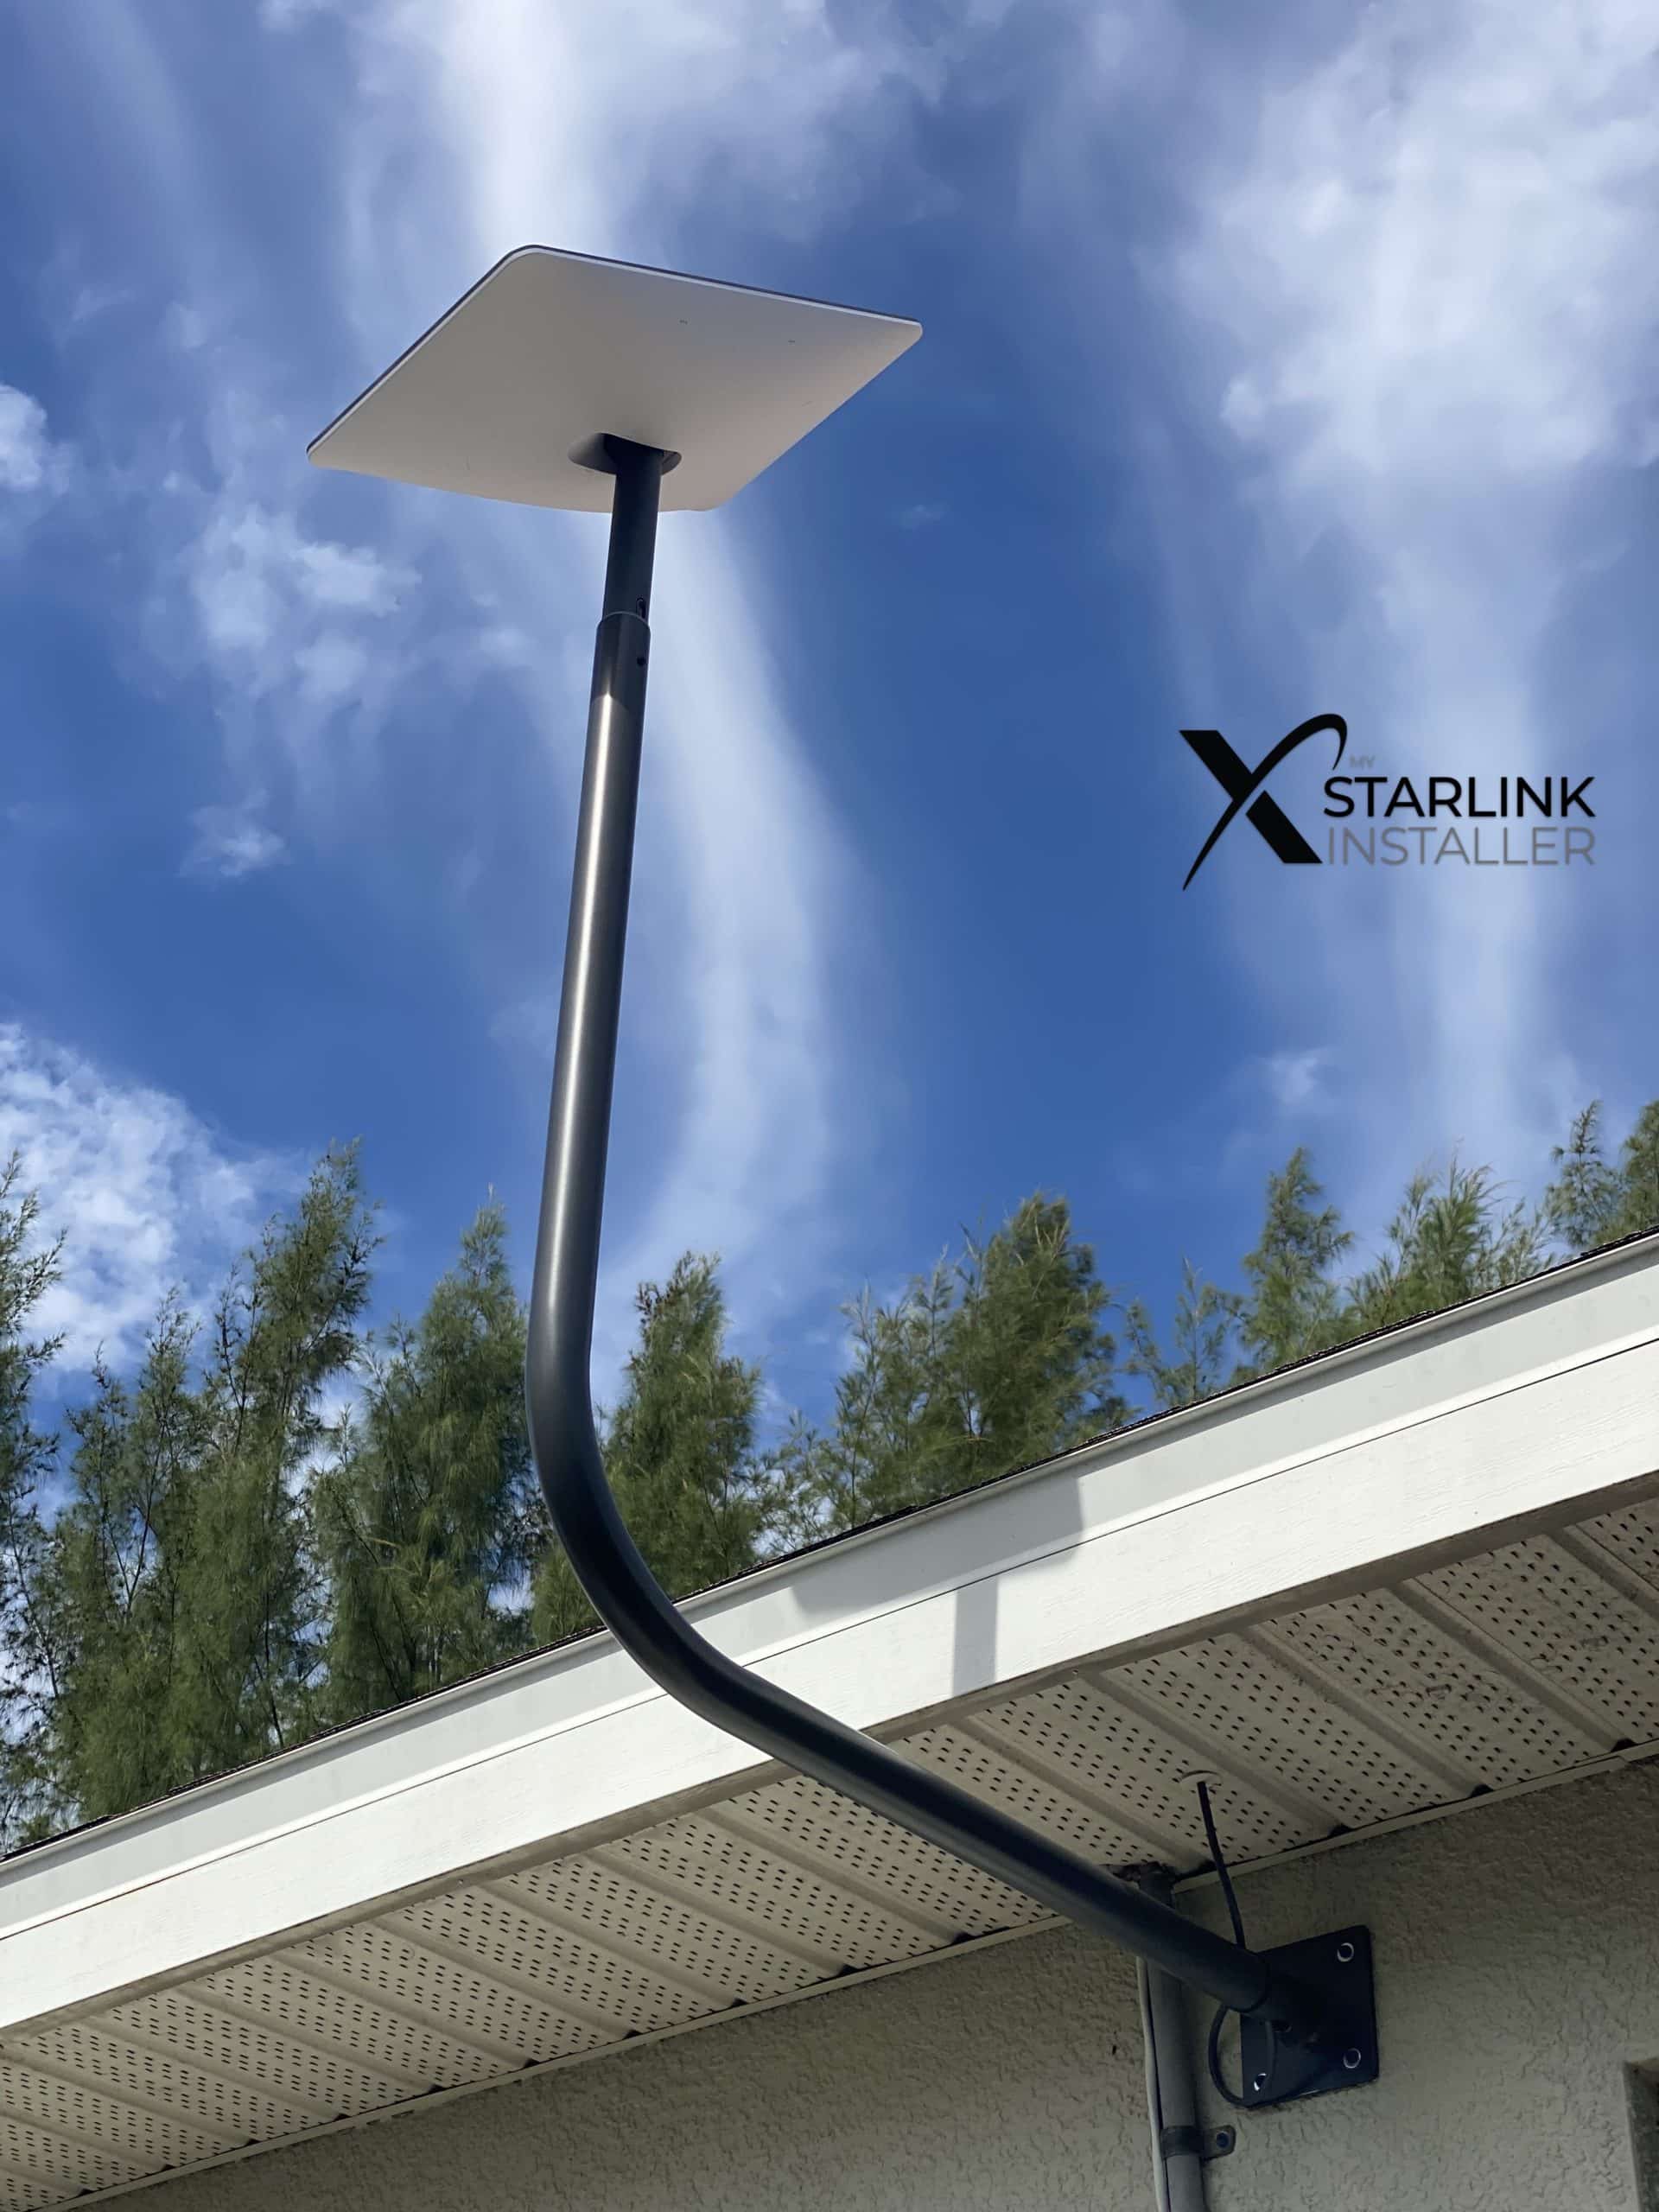 How To Mount A Starlink Dish Outdoor Driving - vrogue.co